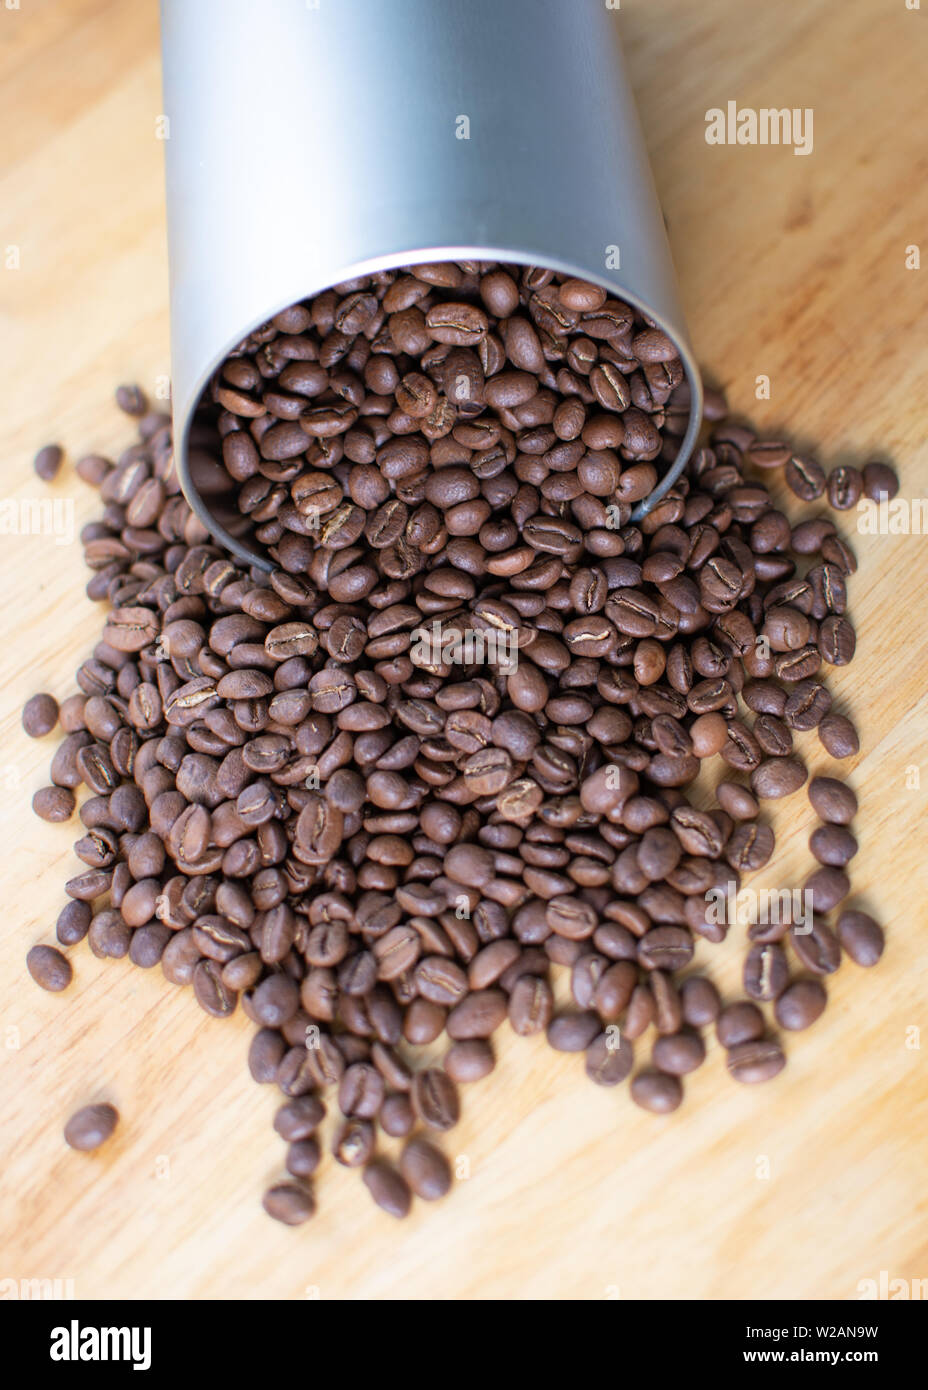 Coffee Beans Spilling out of a Tubular Metal Container Stock Photo